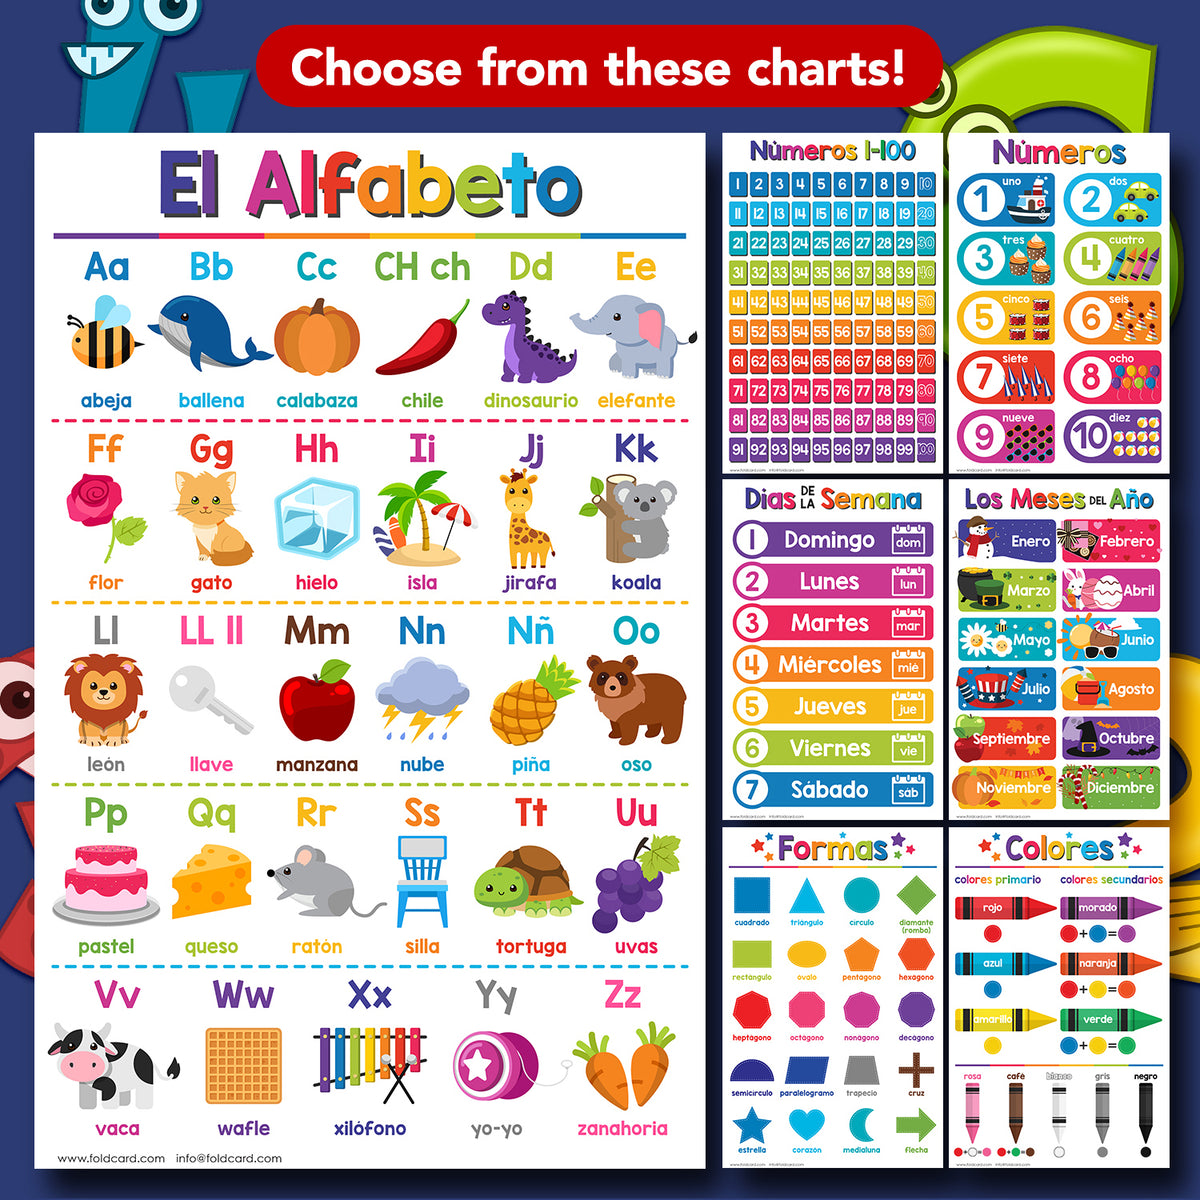 My Body Spanish Chart for Kids | Bright and Colorful Educational Poster | 11" x 17" | 5 Pack